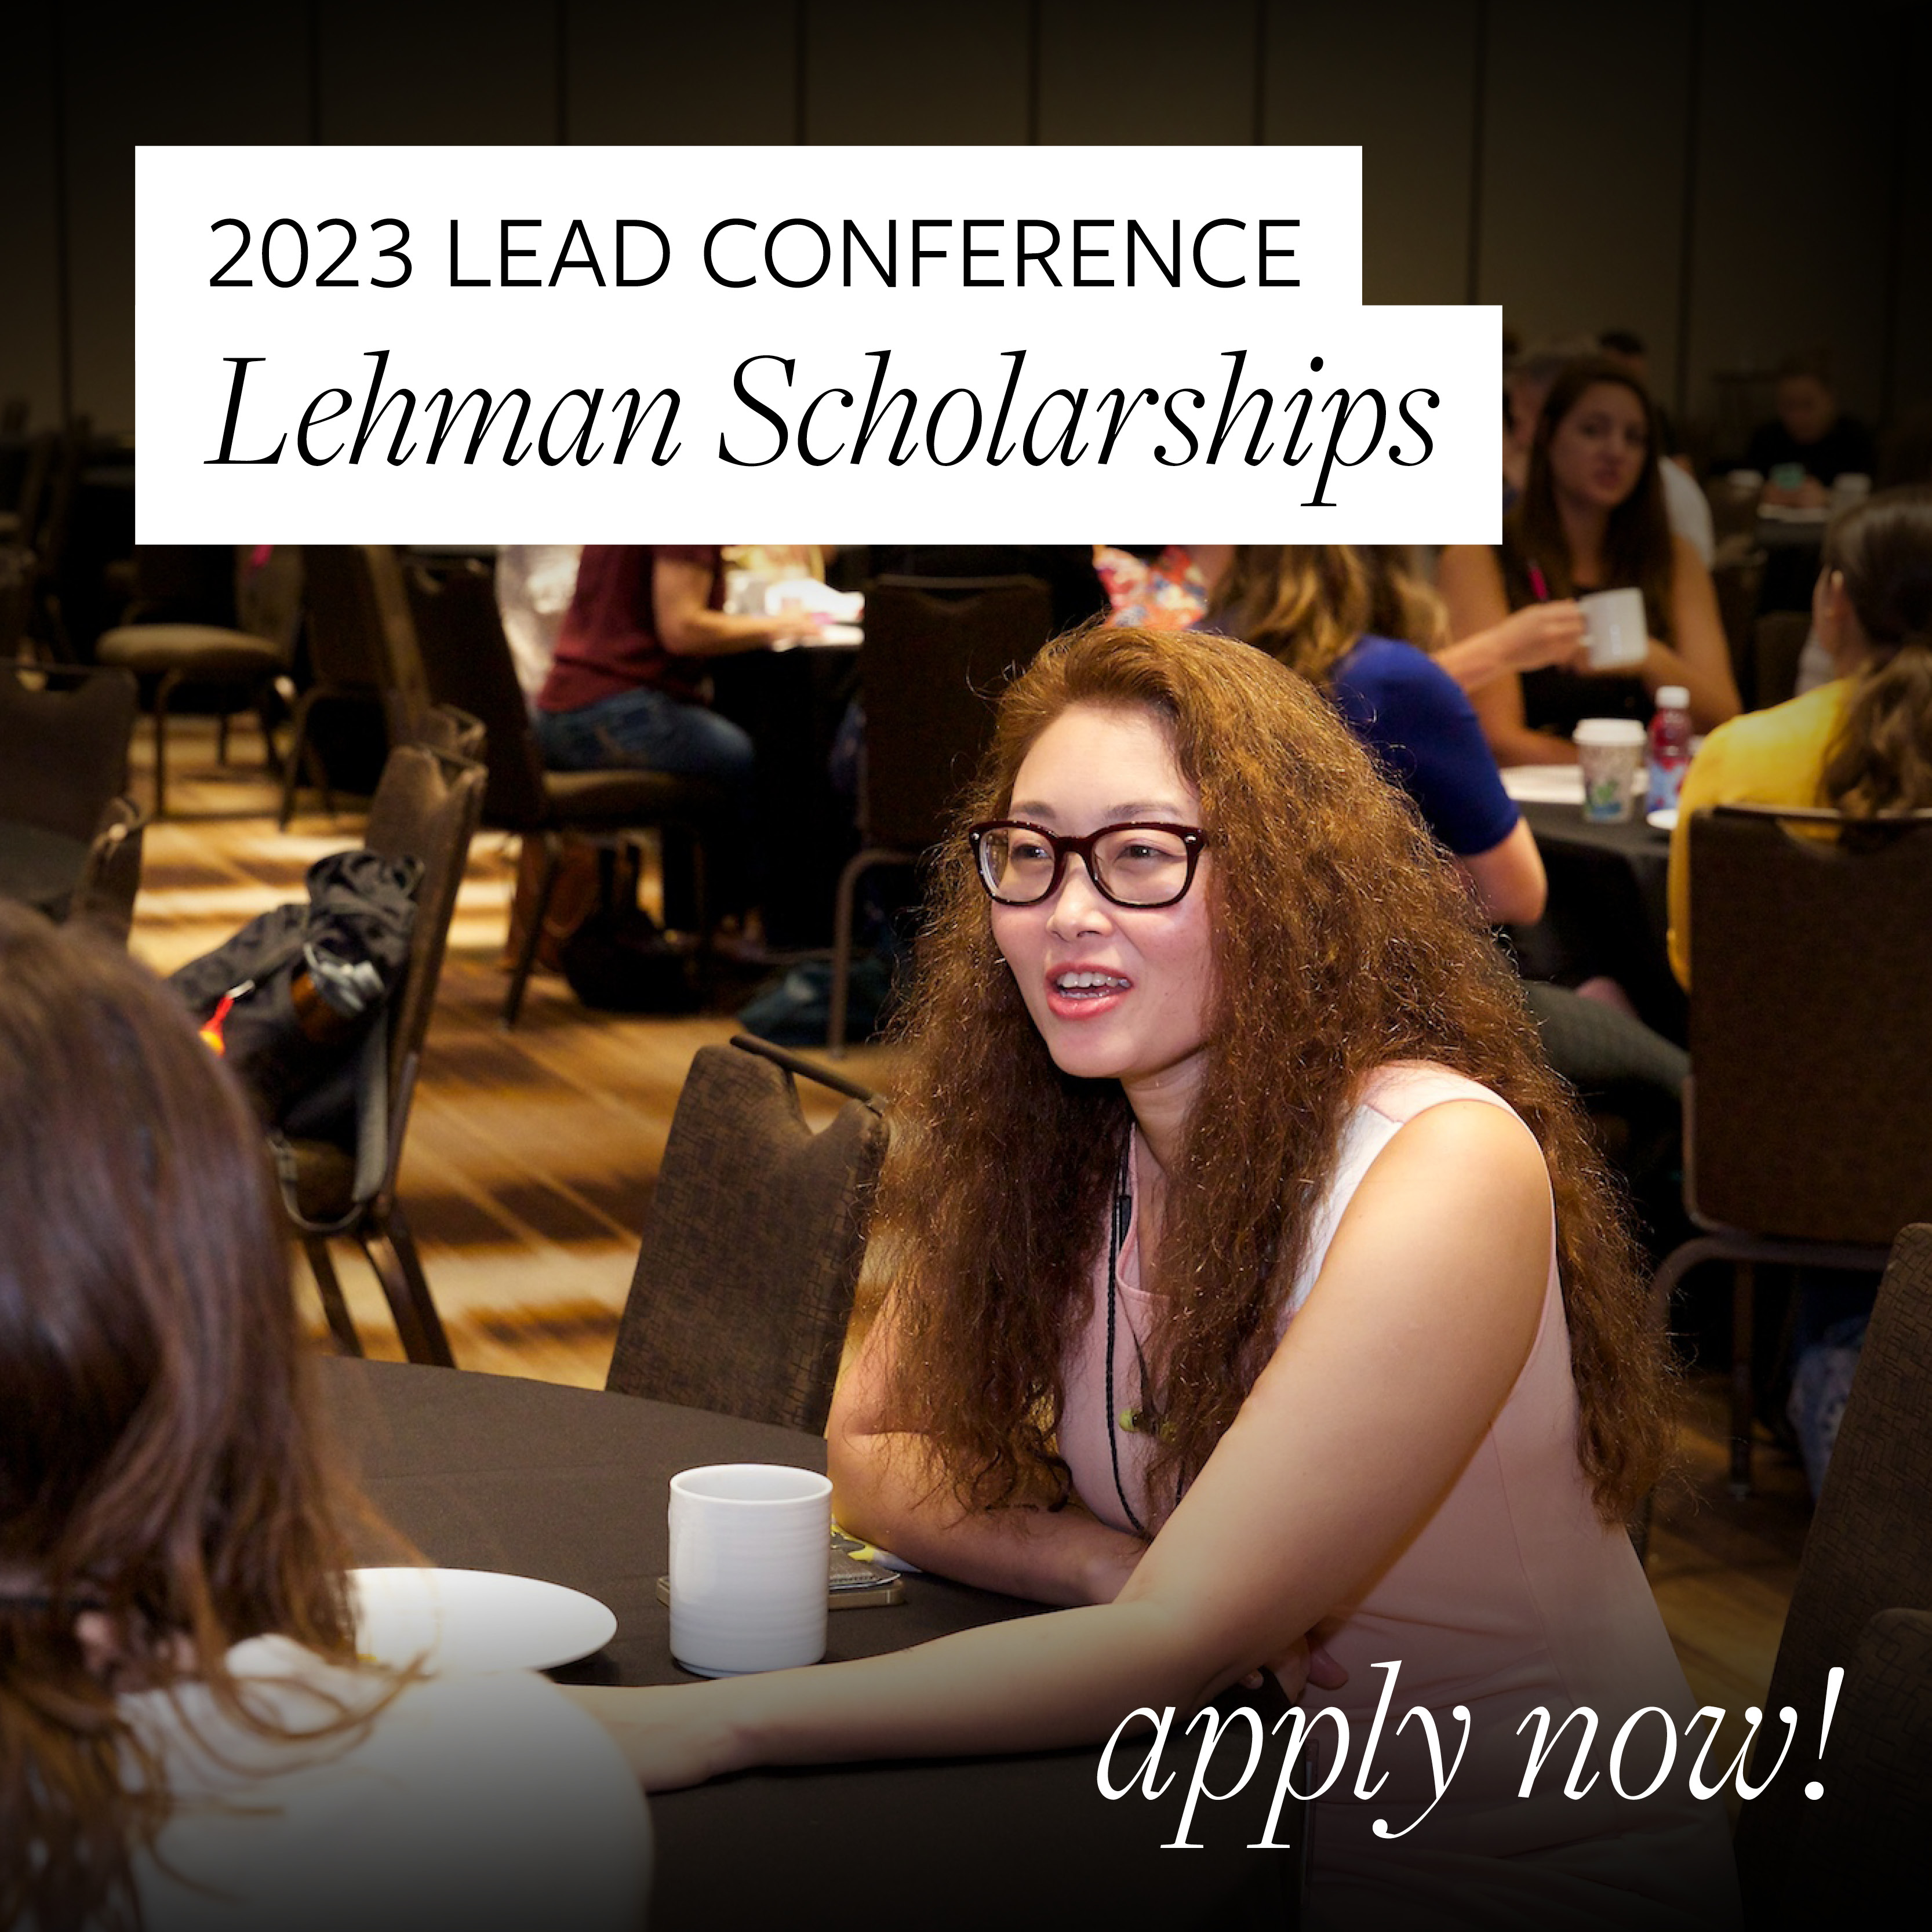 Image of a woman with the text "2023 LEAD Conference Lehman Scholarships. Apply now!"